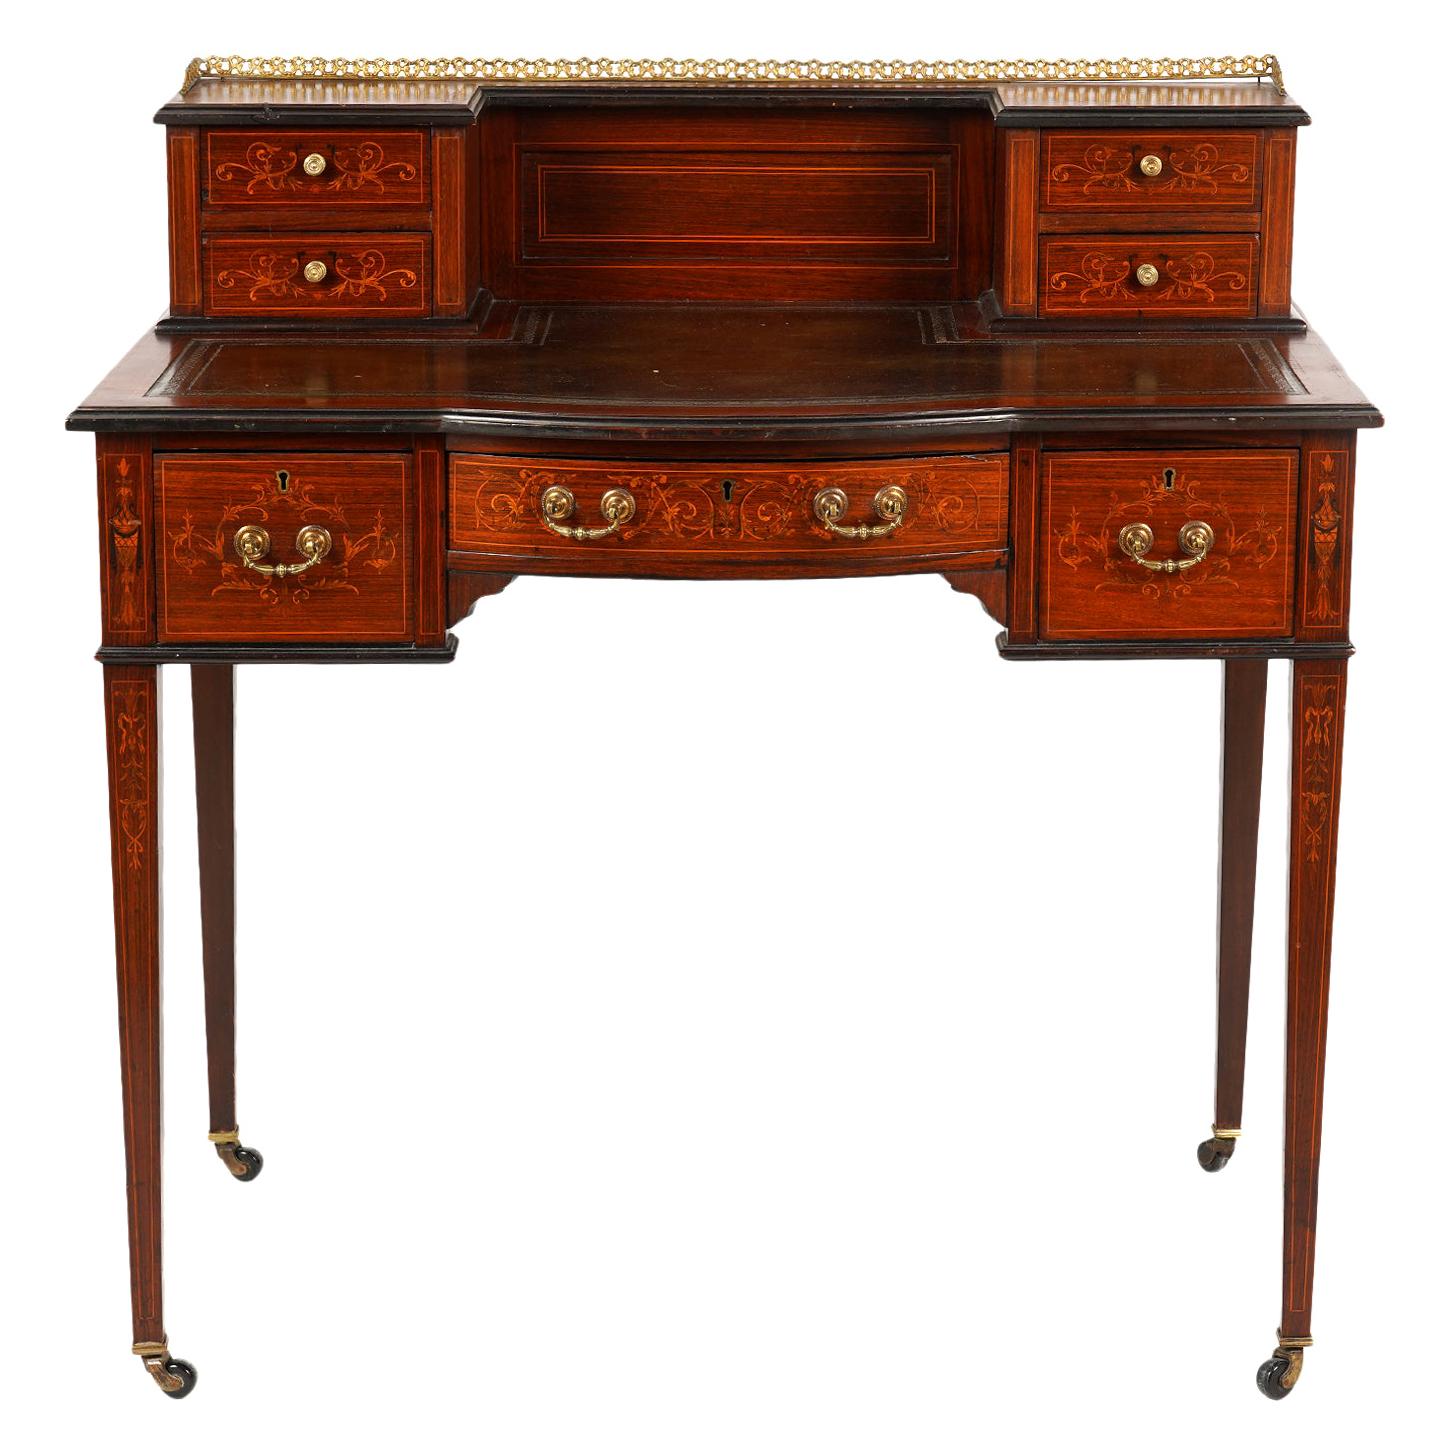 English Edwardian Inlaid Mahogany Bow Front Ladies Writing Desk with Gallery